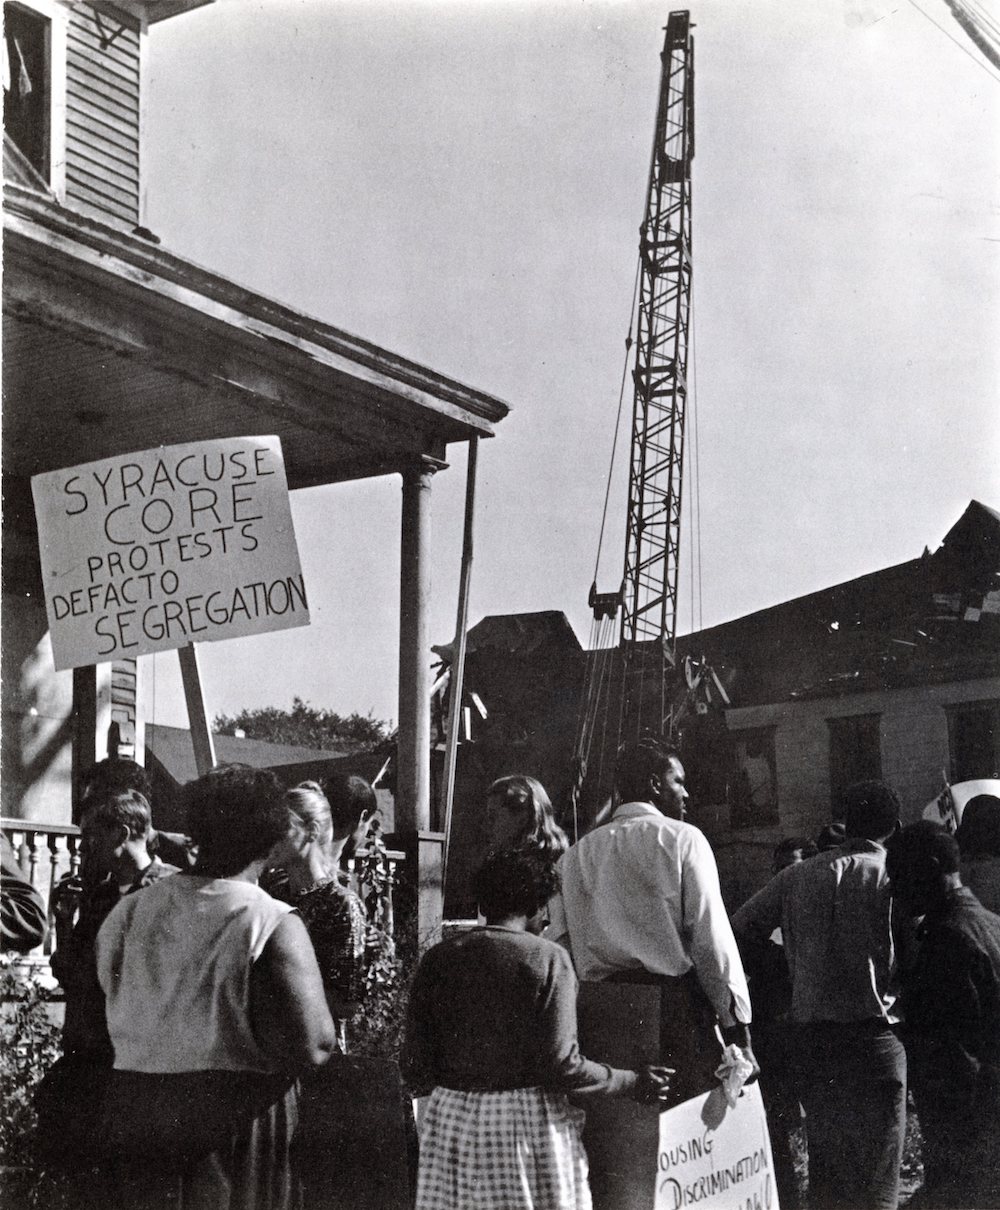 A group of protesters gather in front of a construction crane, with one protester holding up a sign that says “Syracuse CORE protests defacto segregation” and another holding a sign that says “housing discrimination” and is cut off at the bottom of the photo.  